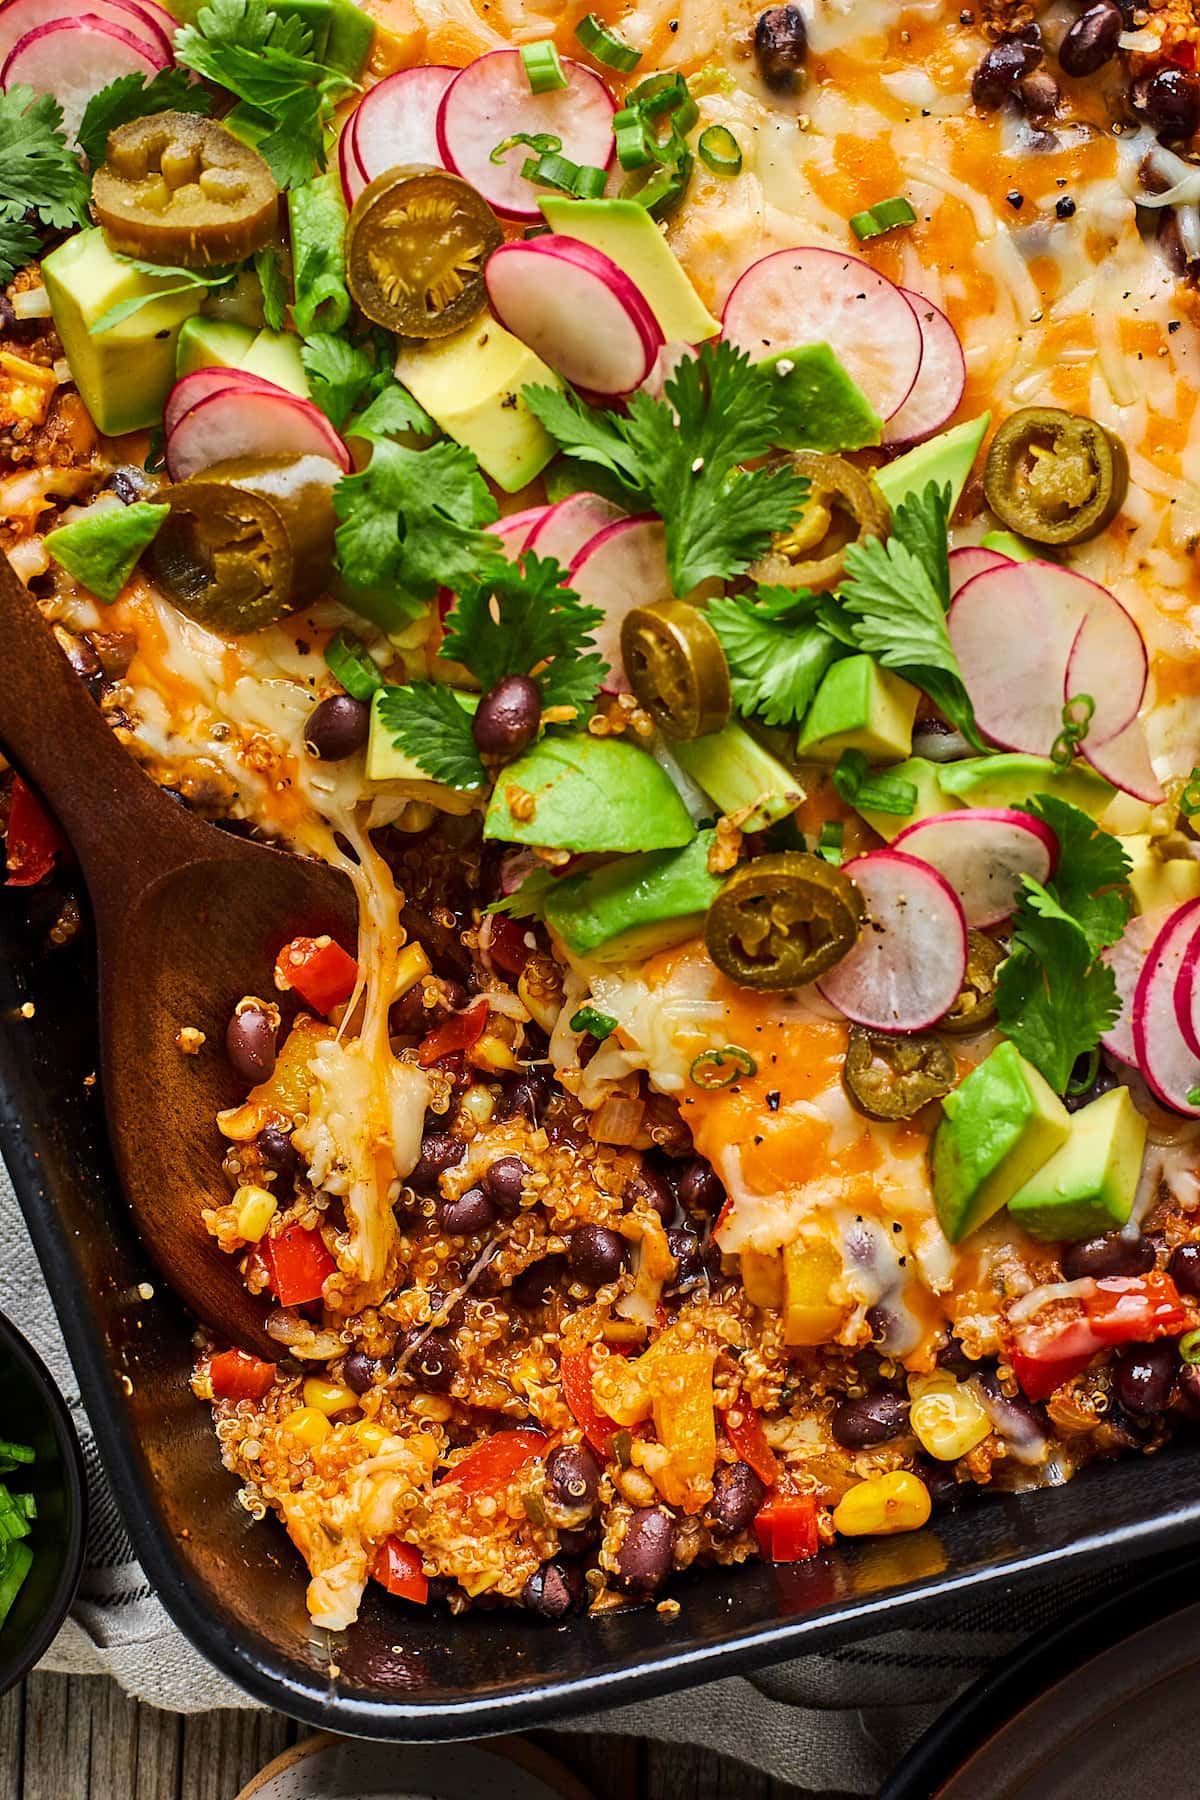 black bean enchilada bake in pan with cheese, toppings, and wooden spoon scooping the casserole.